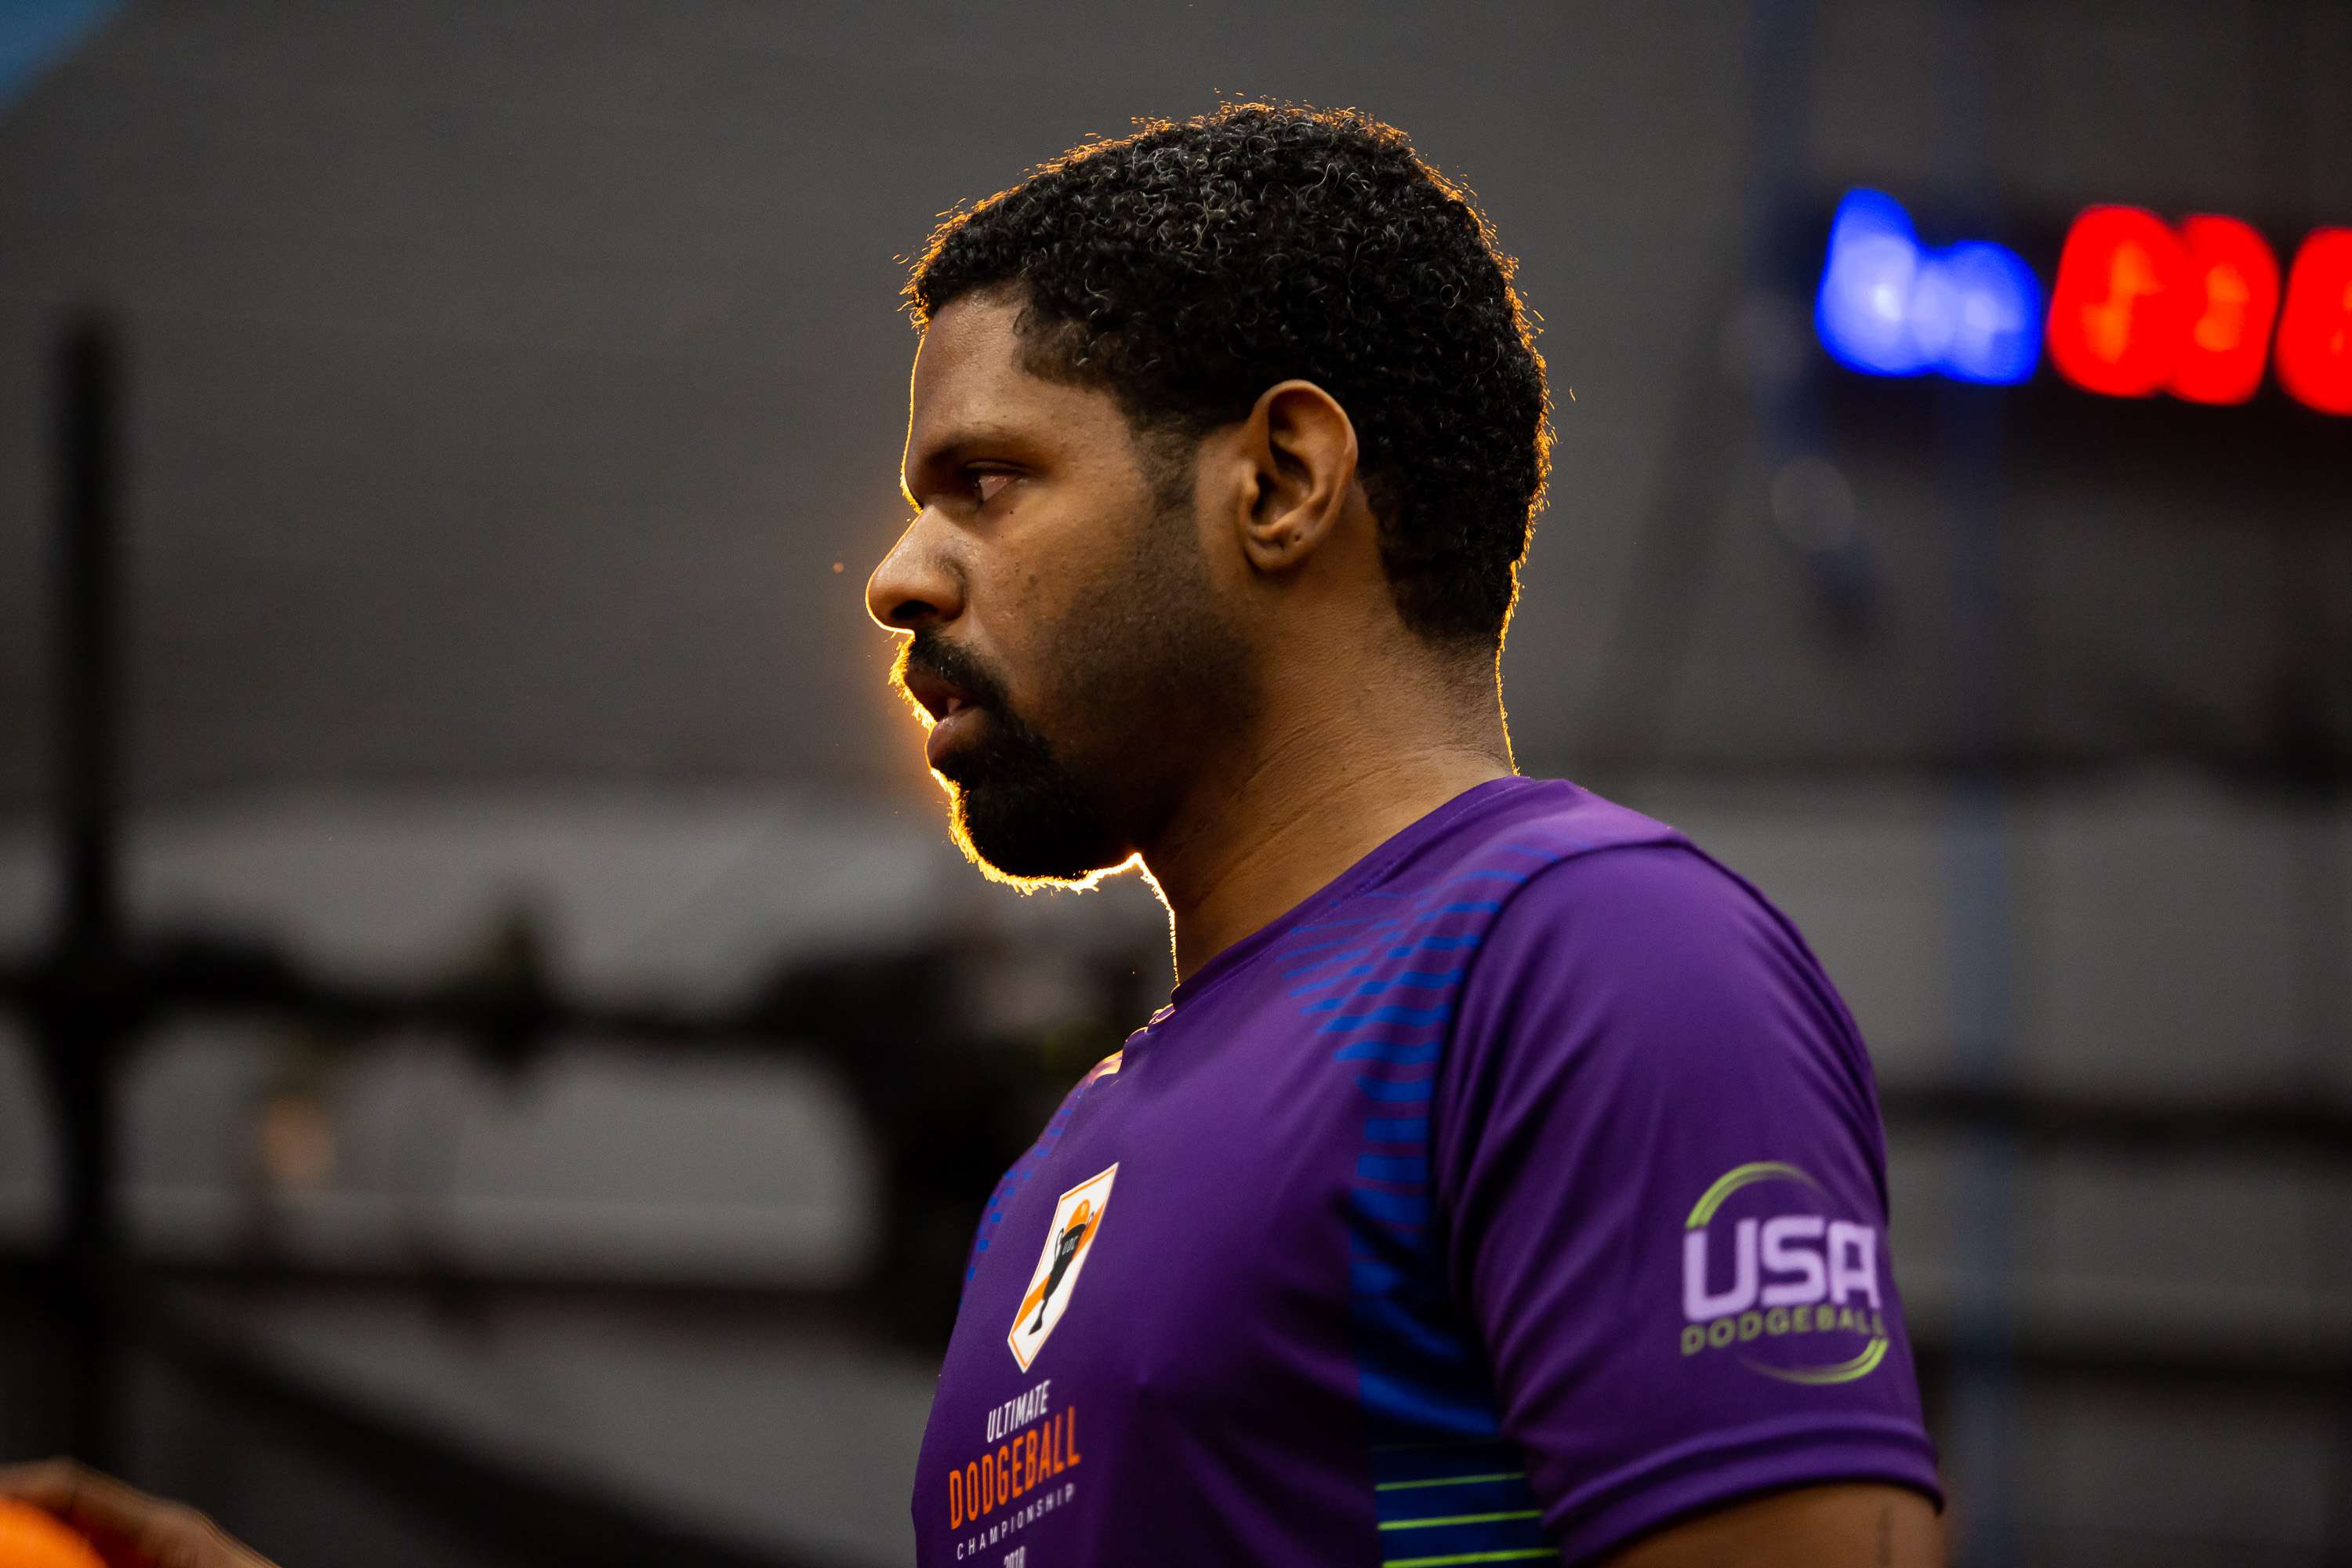 A player walks onto the court while silouetted against a bright light